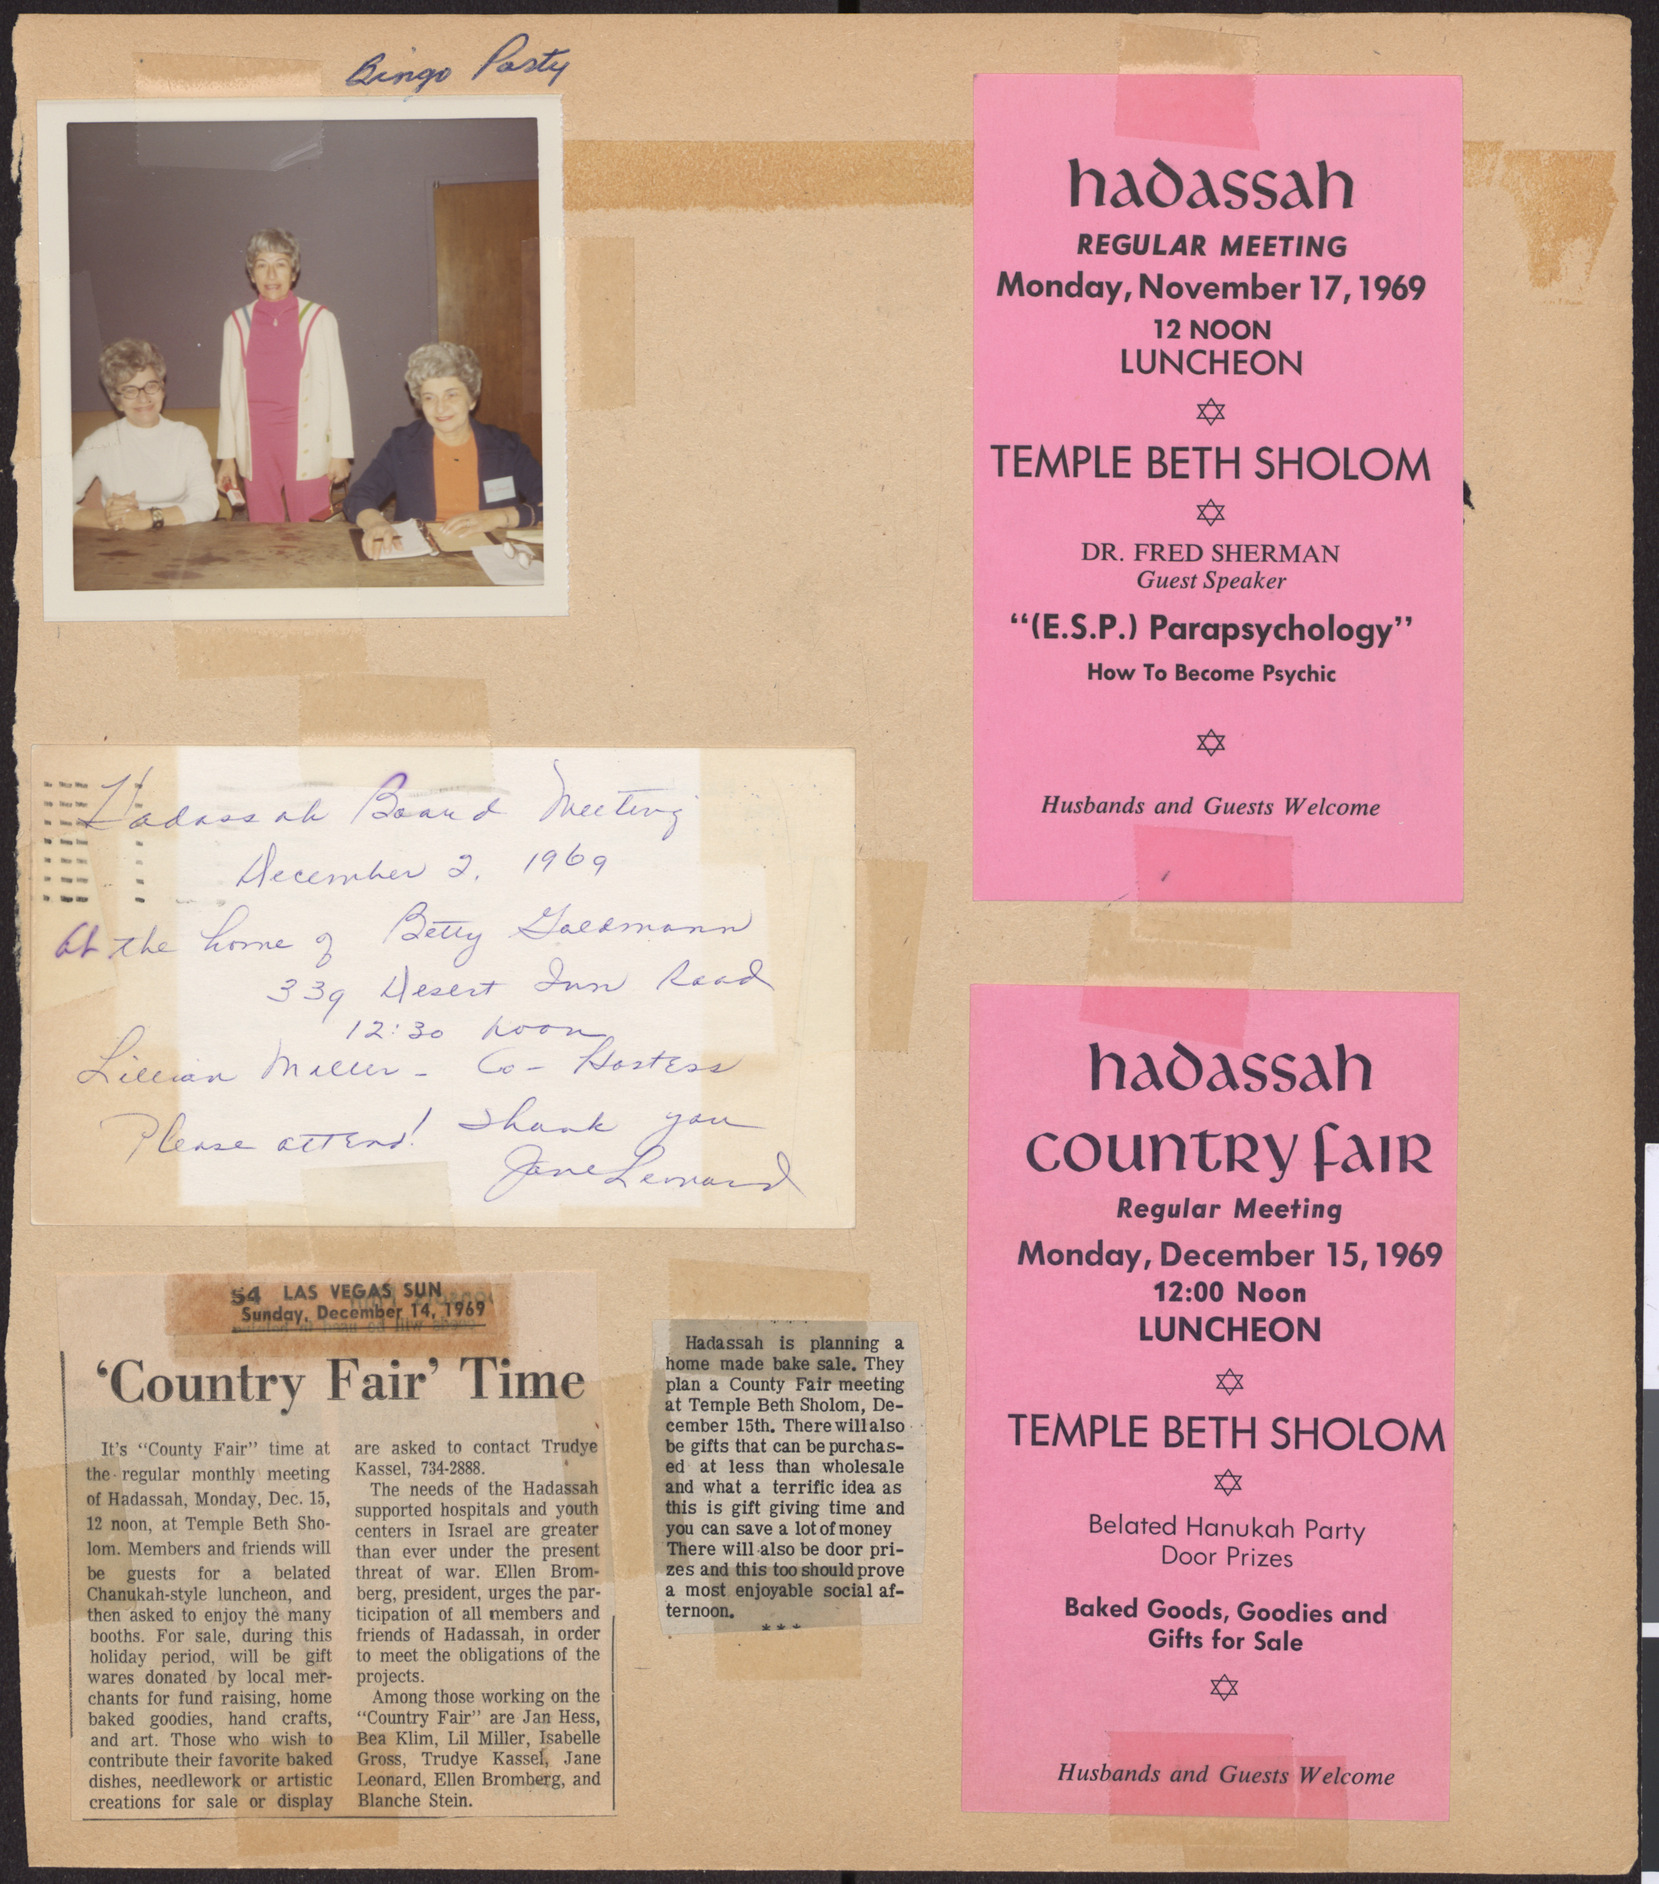 Photograph, newspaper clipping and meeting fliers for Hadassah, December 1969